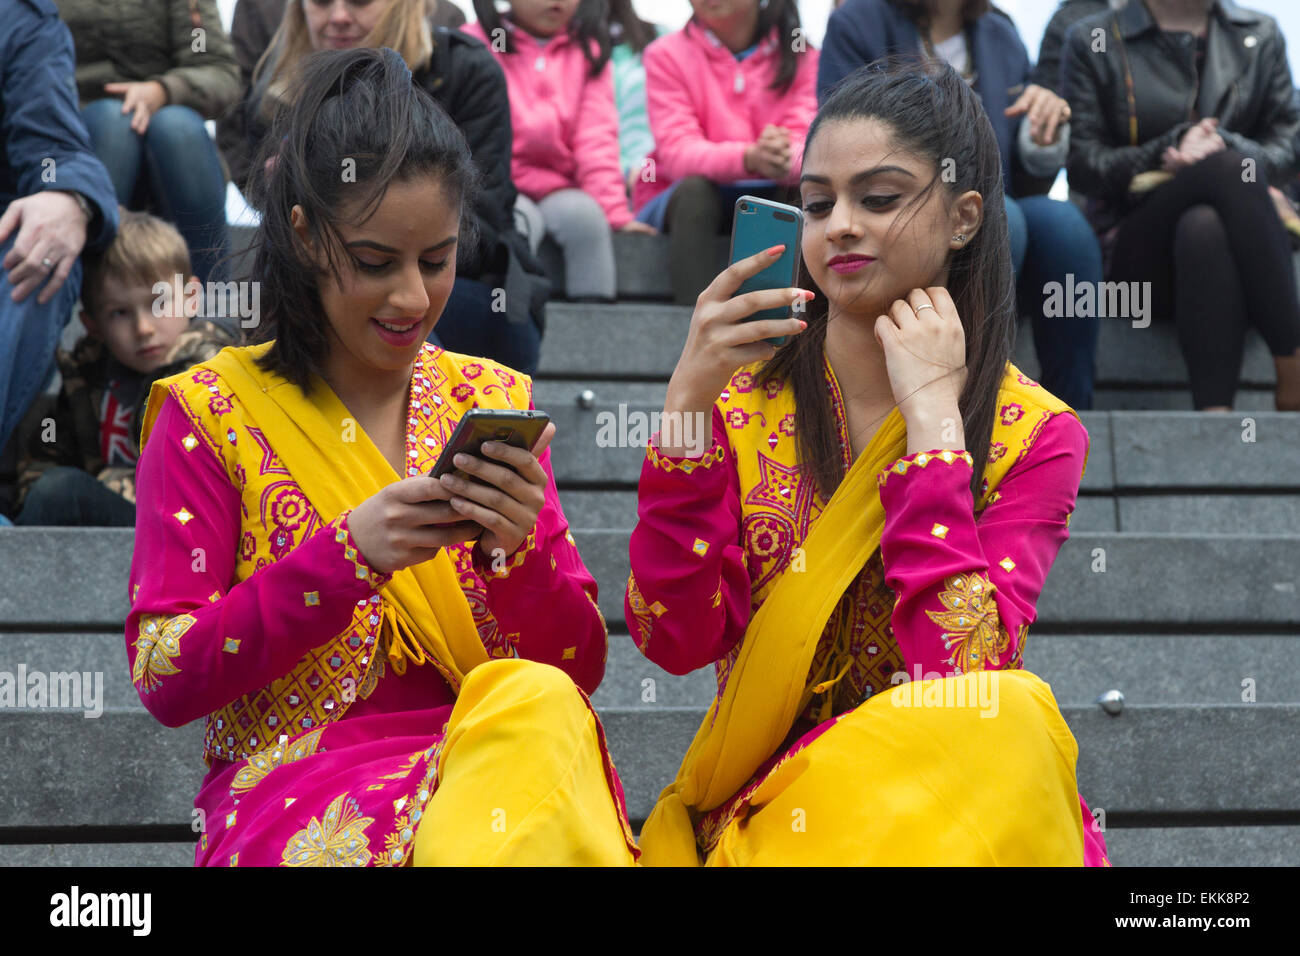 London, UK. 11 April 2015. Female dancers from VP Entertainment take selfies before their show at the Scoop. The Vaisakhi Festival takes place at in and around London's City Hall. Vaisakhi is the most important day in the Sikh calendar, commemorating the beginning of Sikhism as a collective faith. Photo: Nick Savage/Alamy Live News Stock Photo